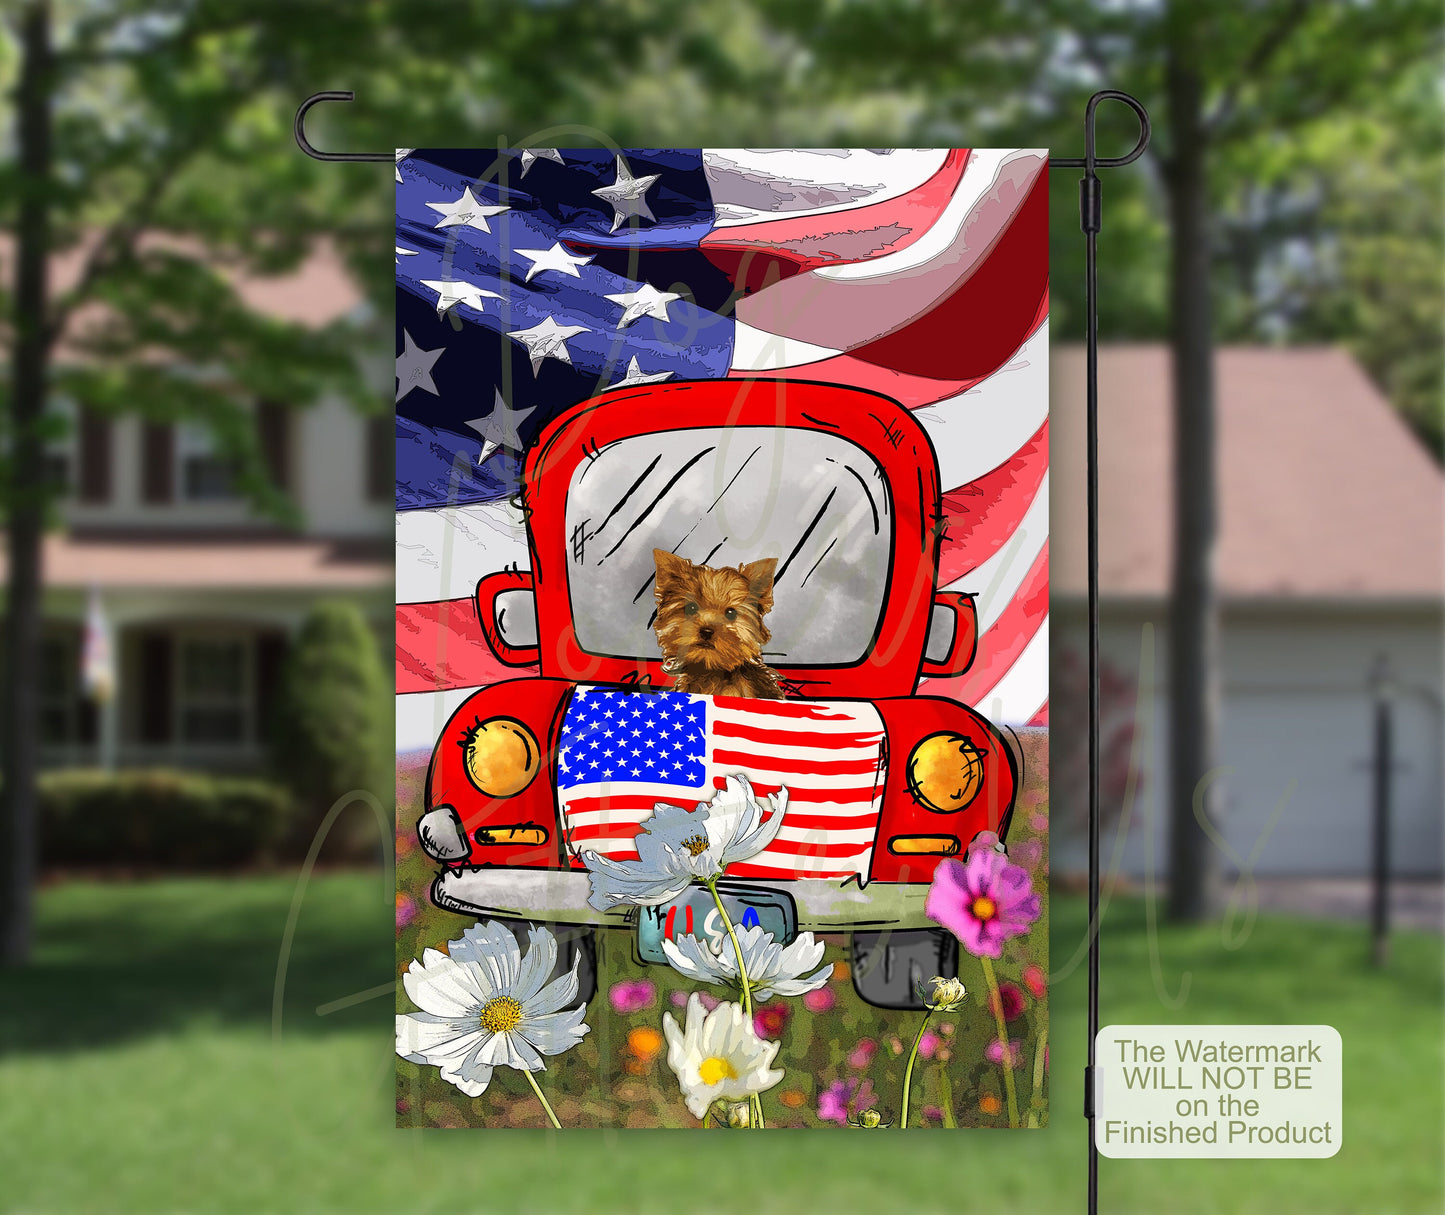 Yorkshire Terrier, House Flags, American Flag Art, Patriotic Decor, Outdoor Flag, New Home Gift, Yorkie Gifts, Vintage Truck, Daisies Field